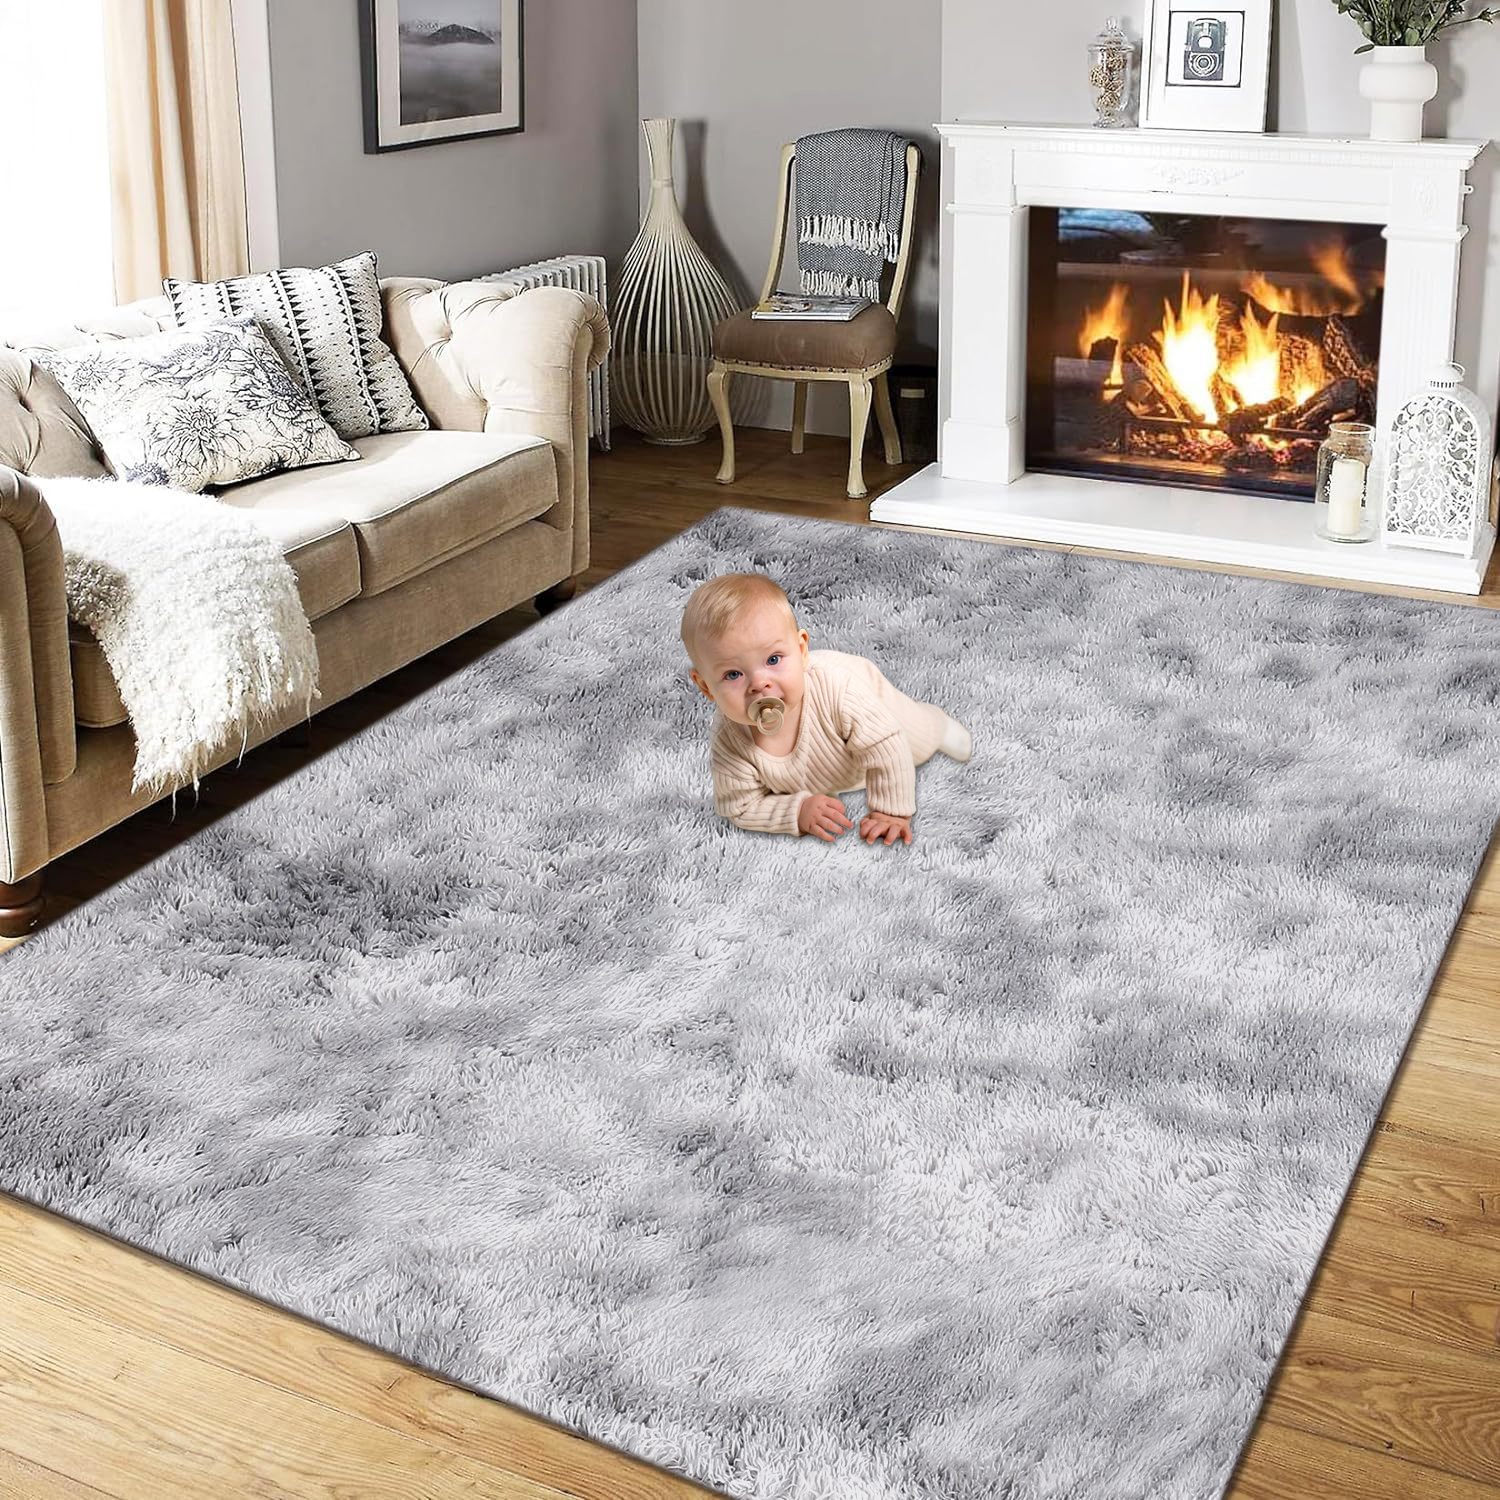 iFanze Large Area Rug, 5ft x 8ft Shag Living Room Rug, Indoor Modern Tie-dye Area Rugs for Bedroom, Rectangle Fluffy Home Carpets, Gray - image 1 of 11